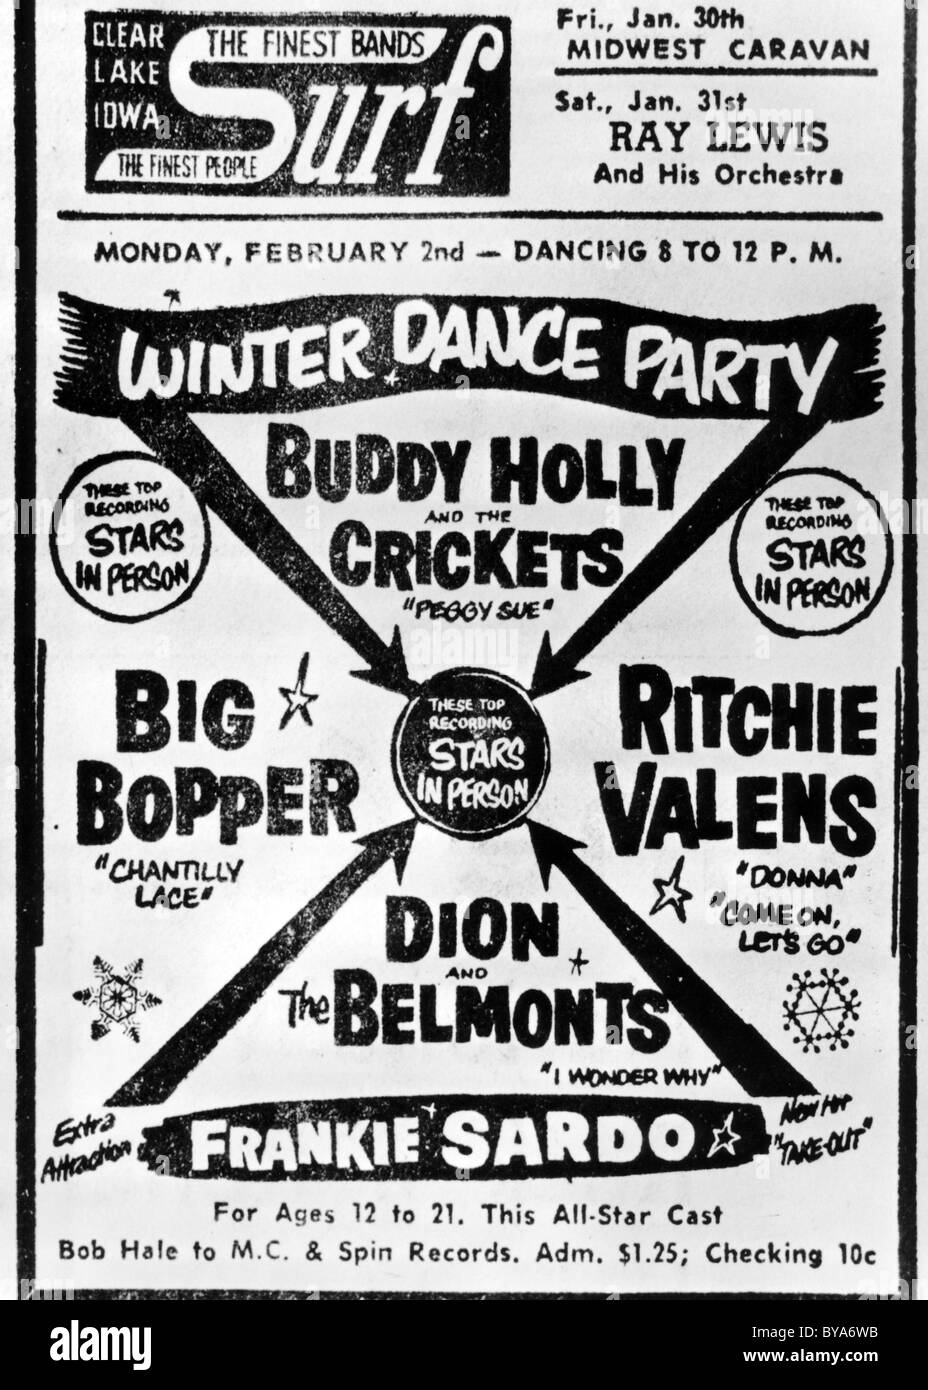 BUDDY HOLLY AND THE CRICKETS  Poster for last concert  on 2 February 1959 at Clear Lake, Iowa Stock Photo